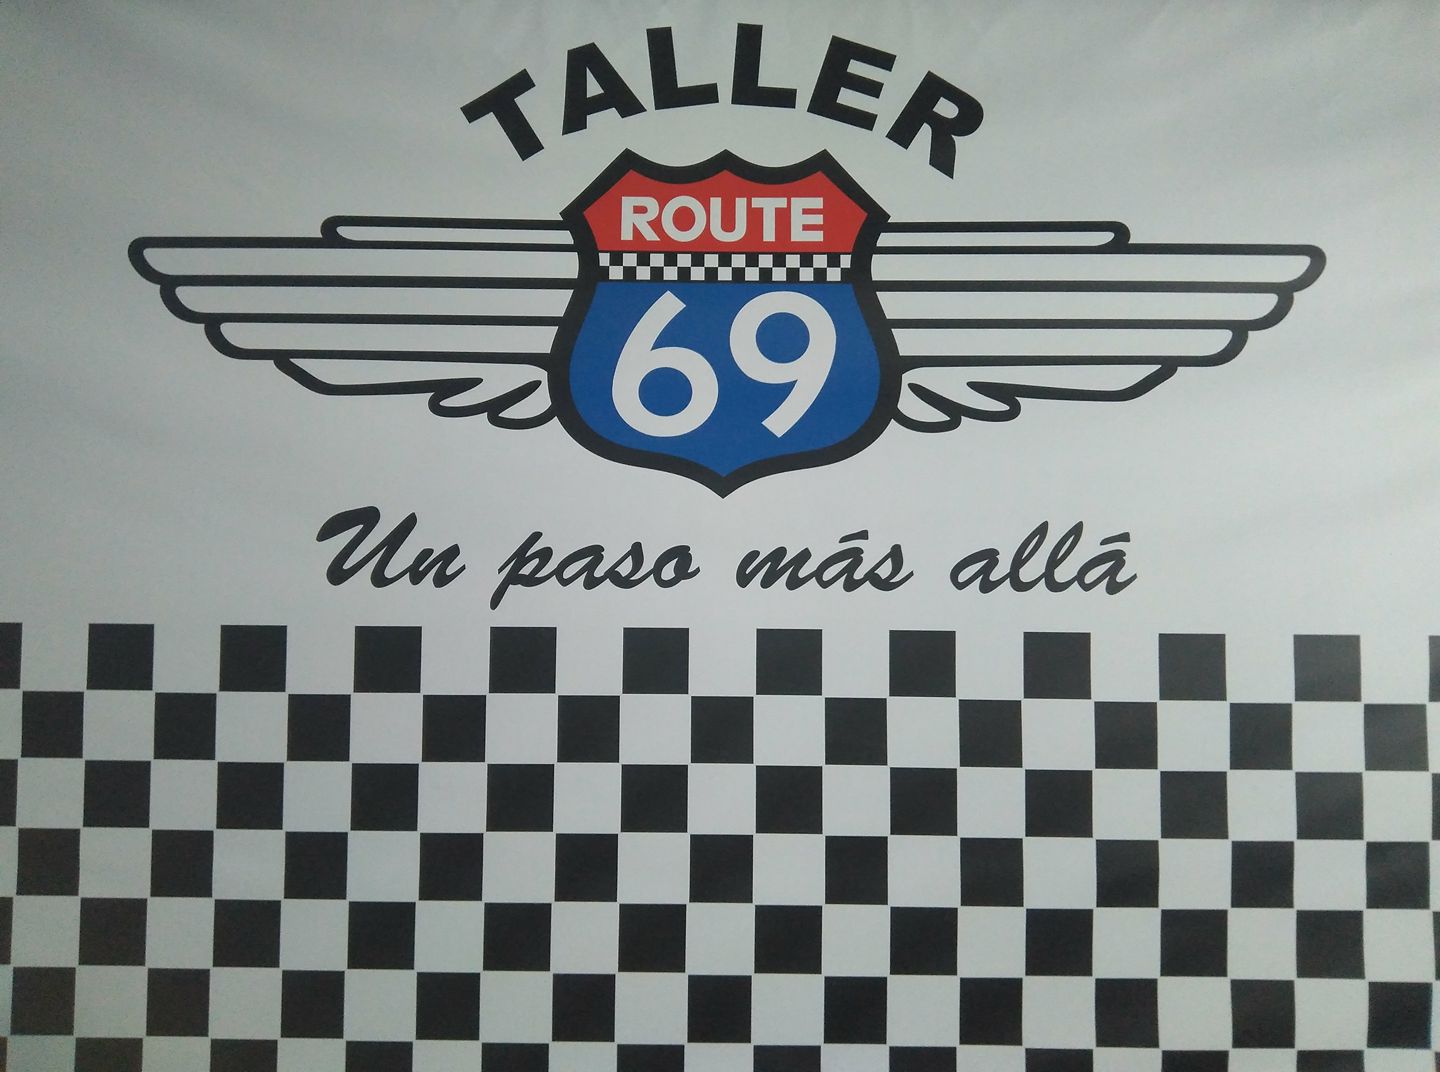 TALLER ROUTE 69